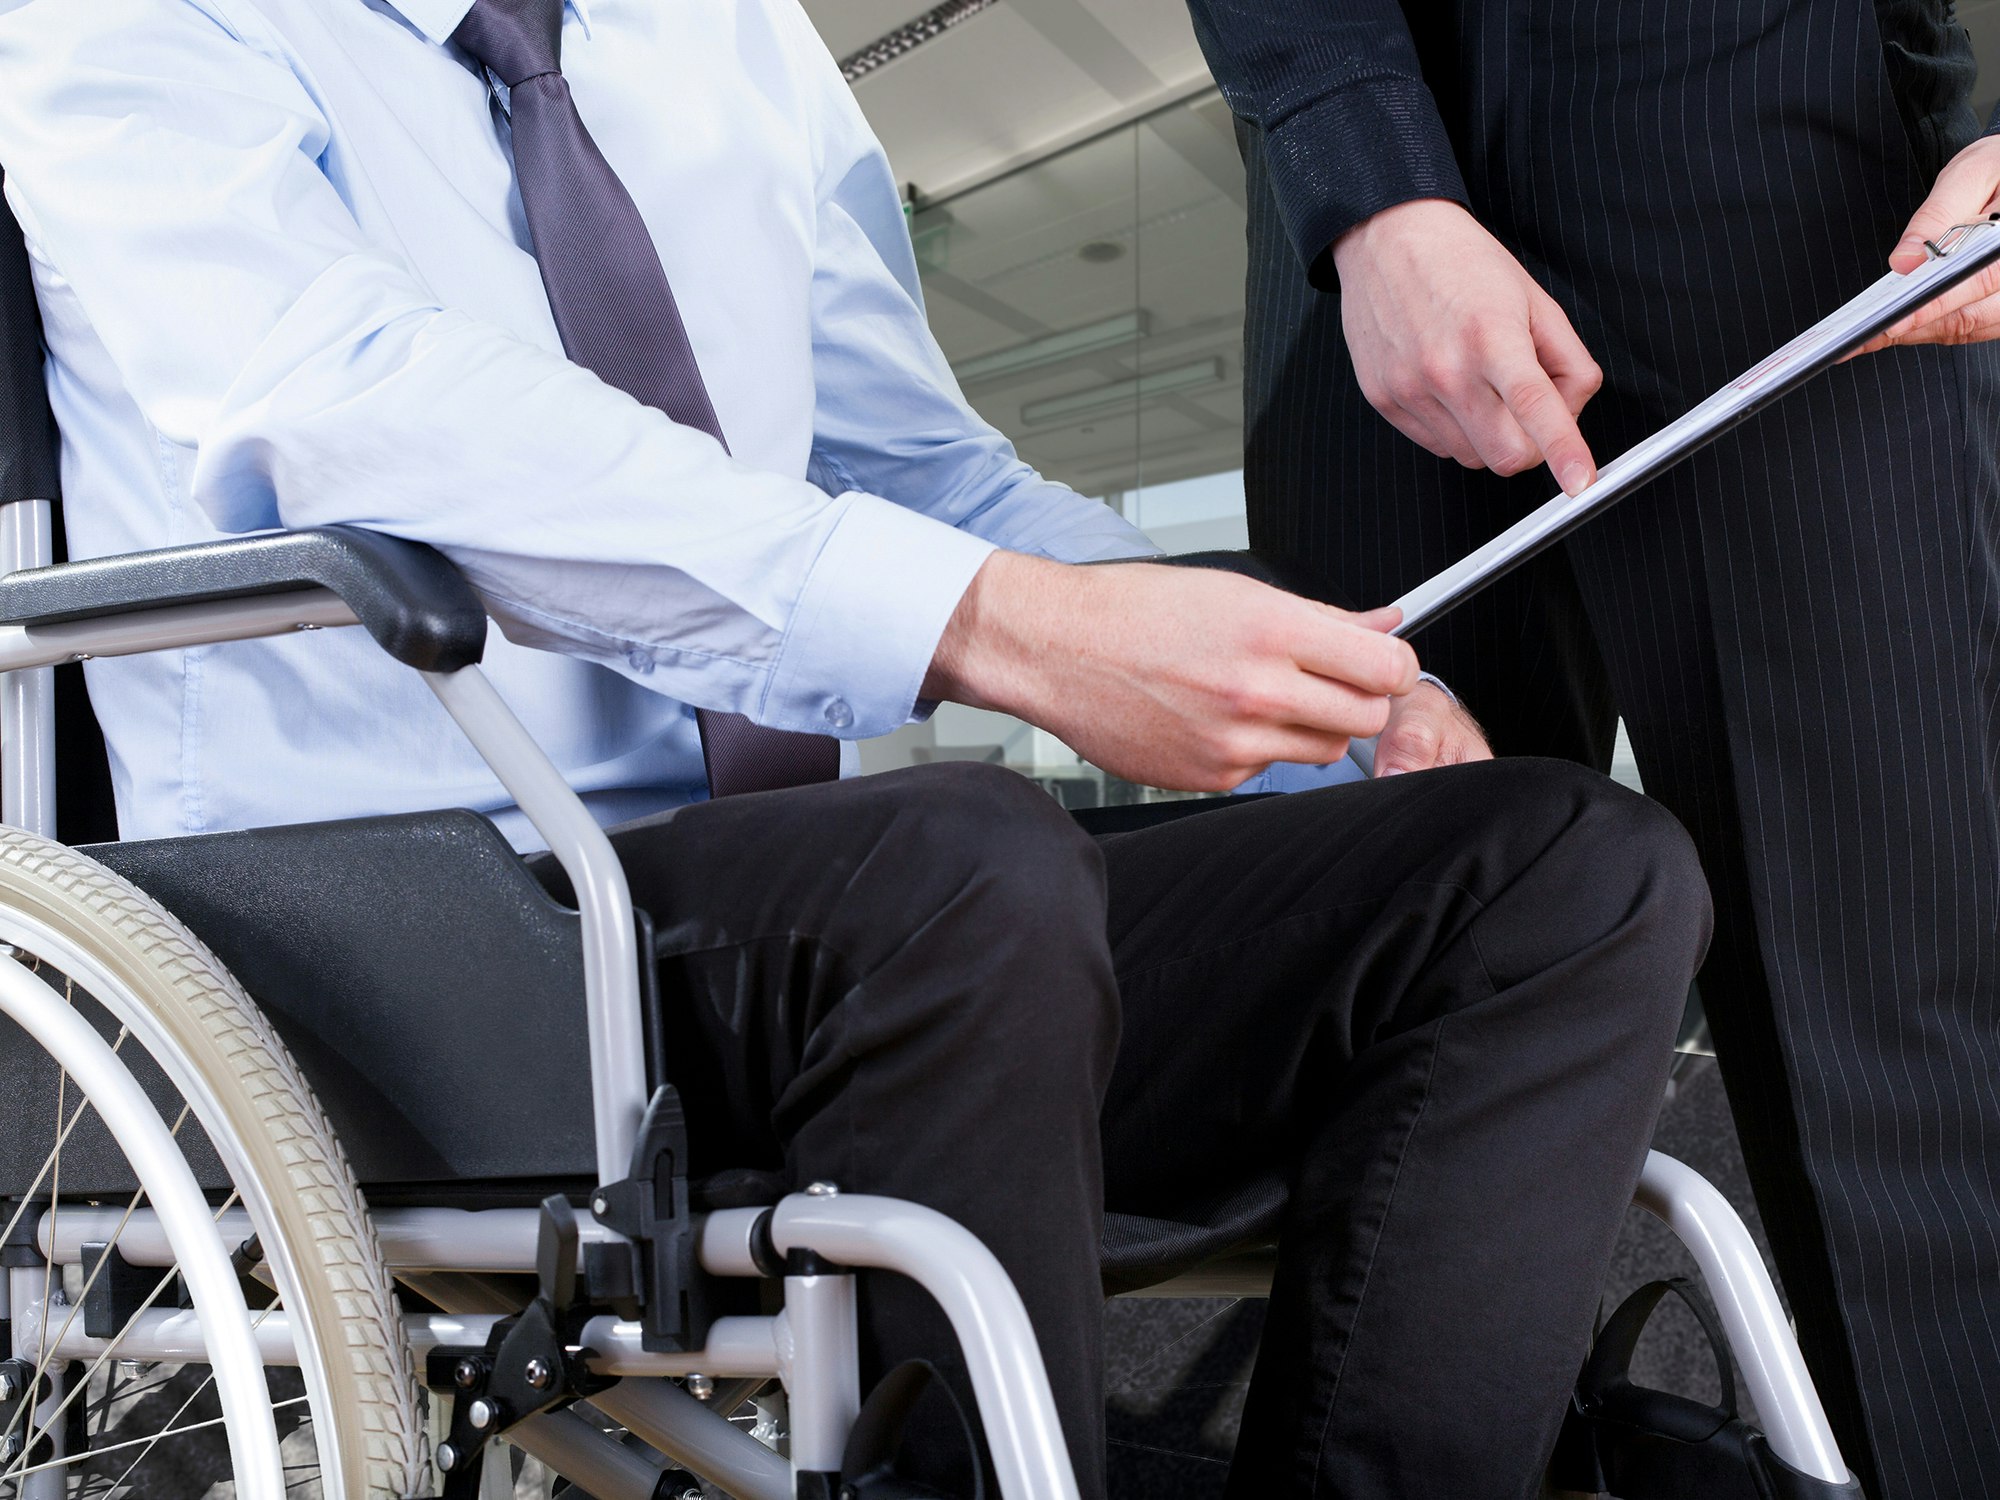 <p>The upcoming AccessAbility Day aims to reduce unemployment for people with a disability. (Shutterstock)</p>
